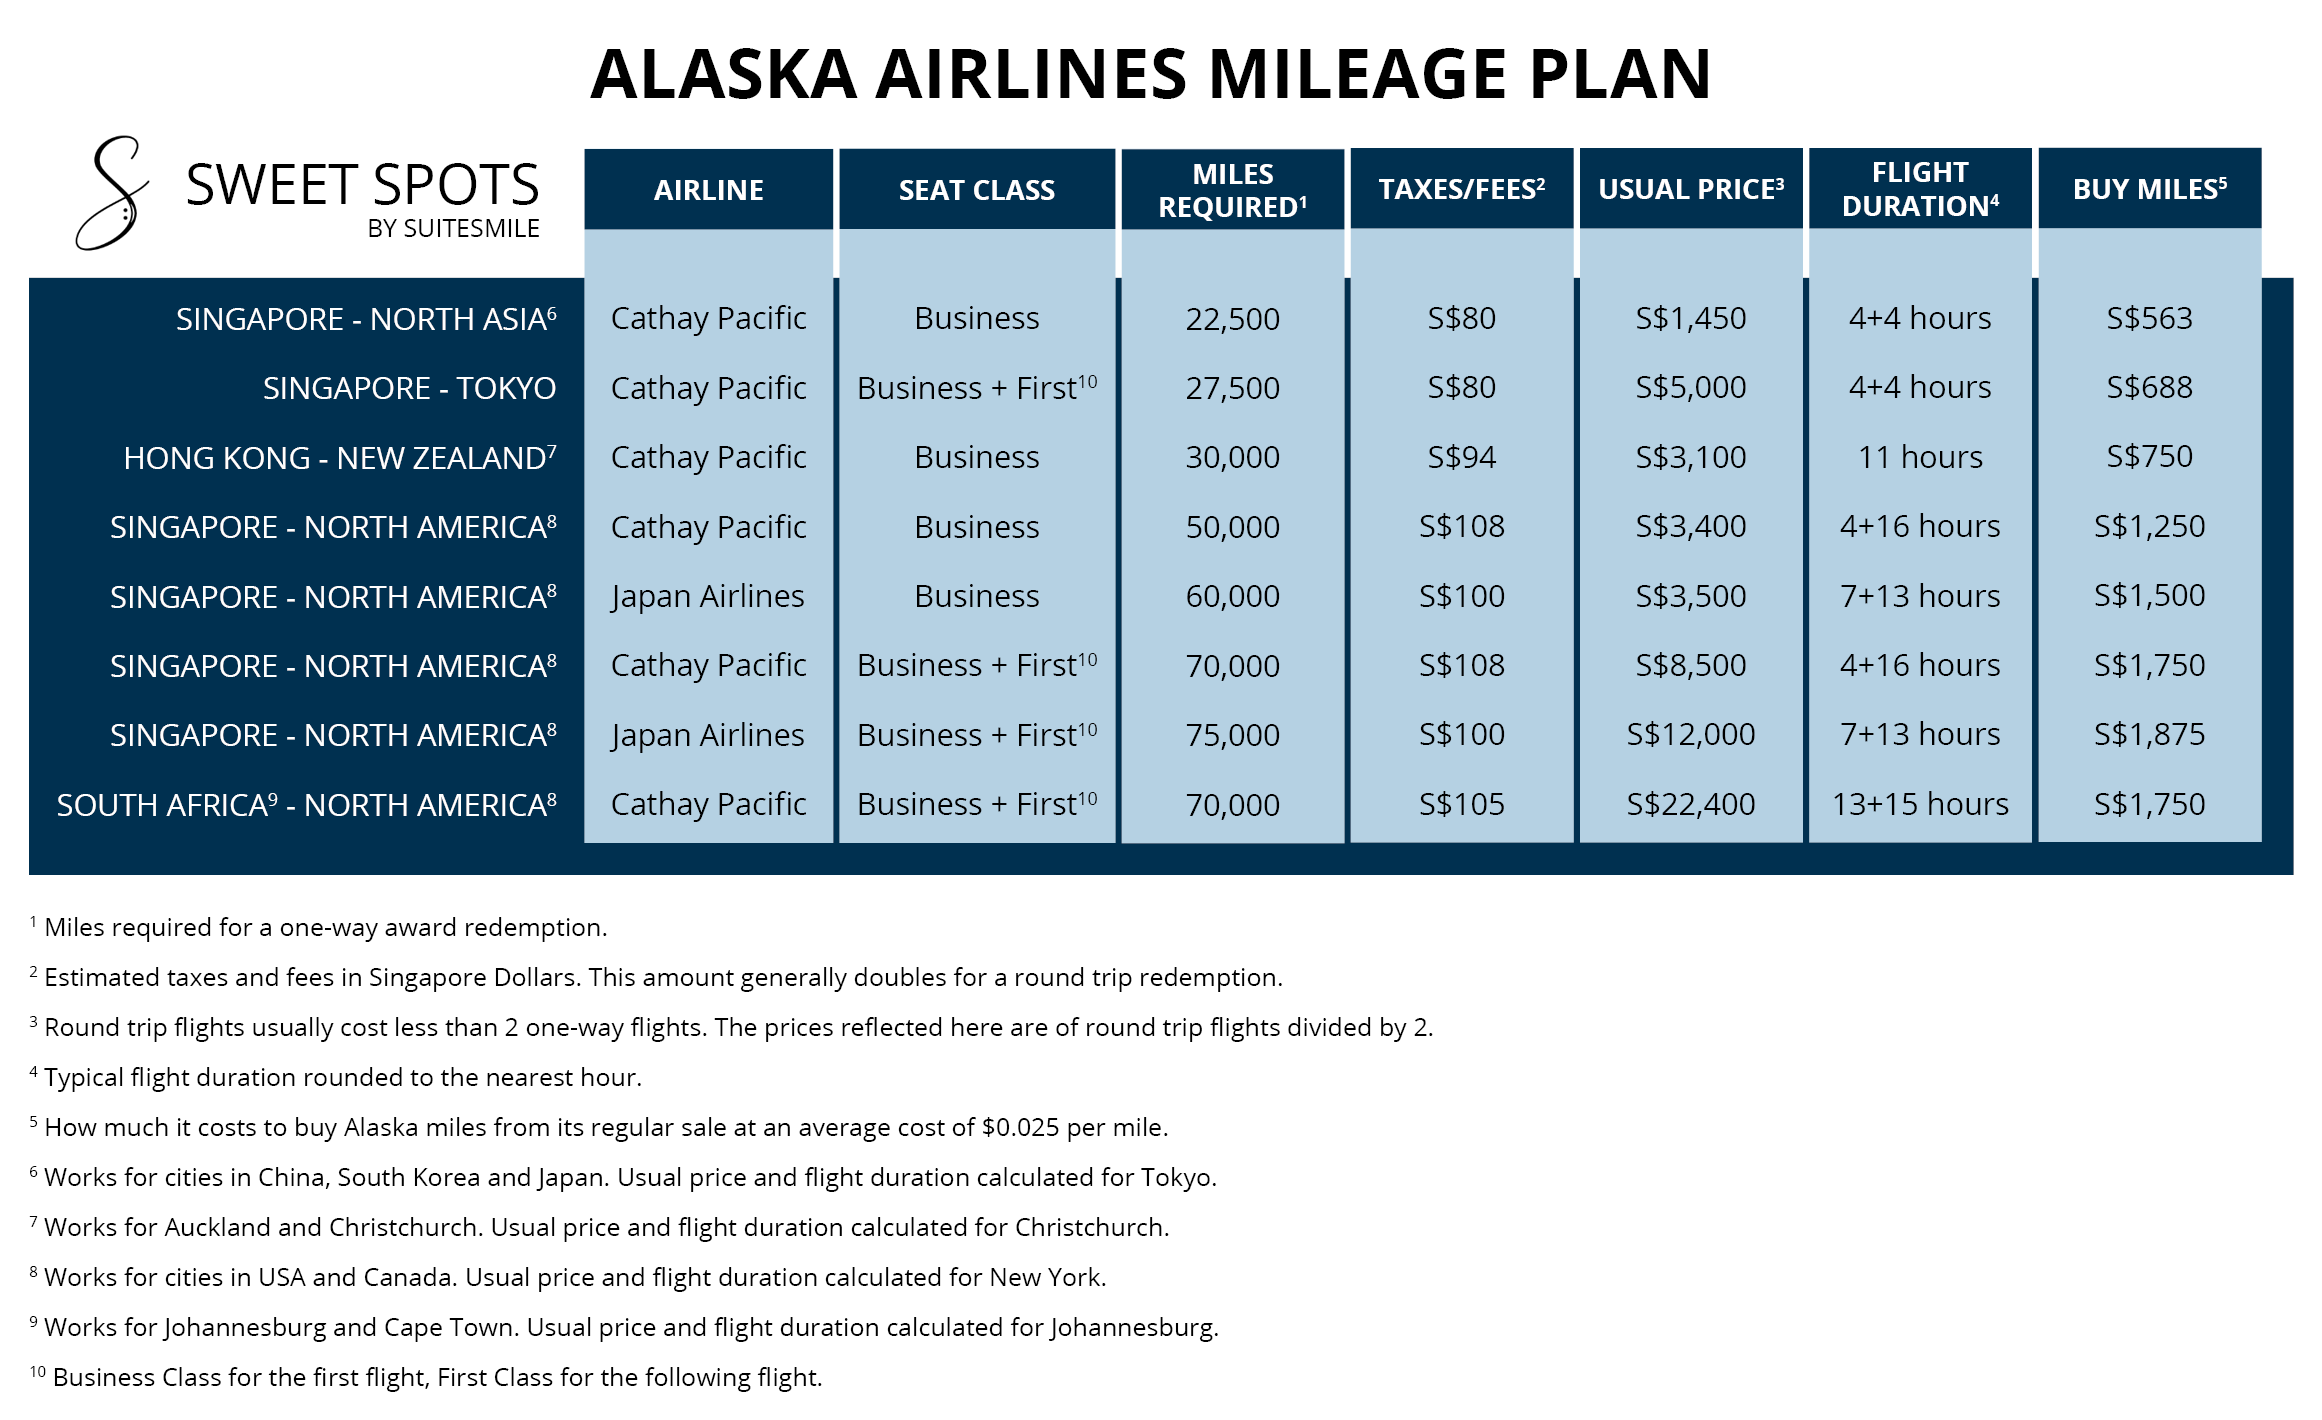 Alaska Airlines sweet spots at $0.025 a mile